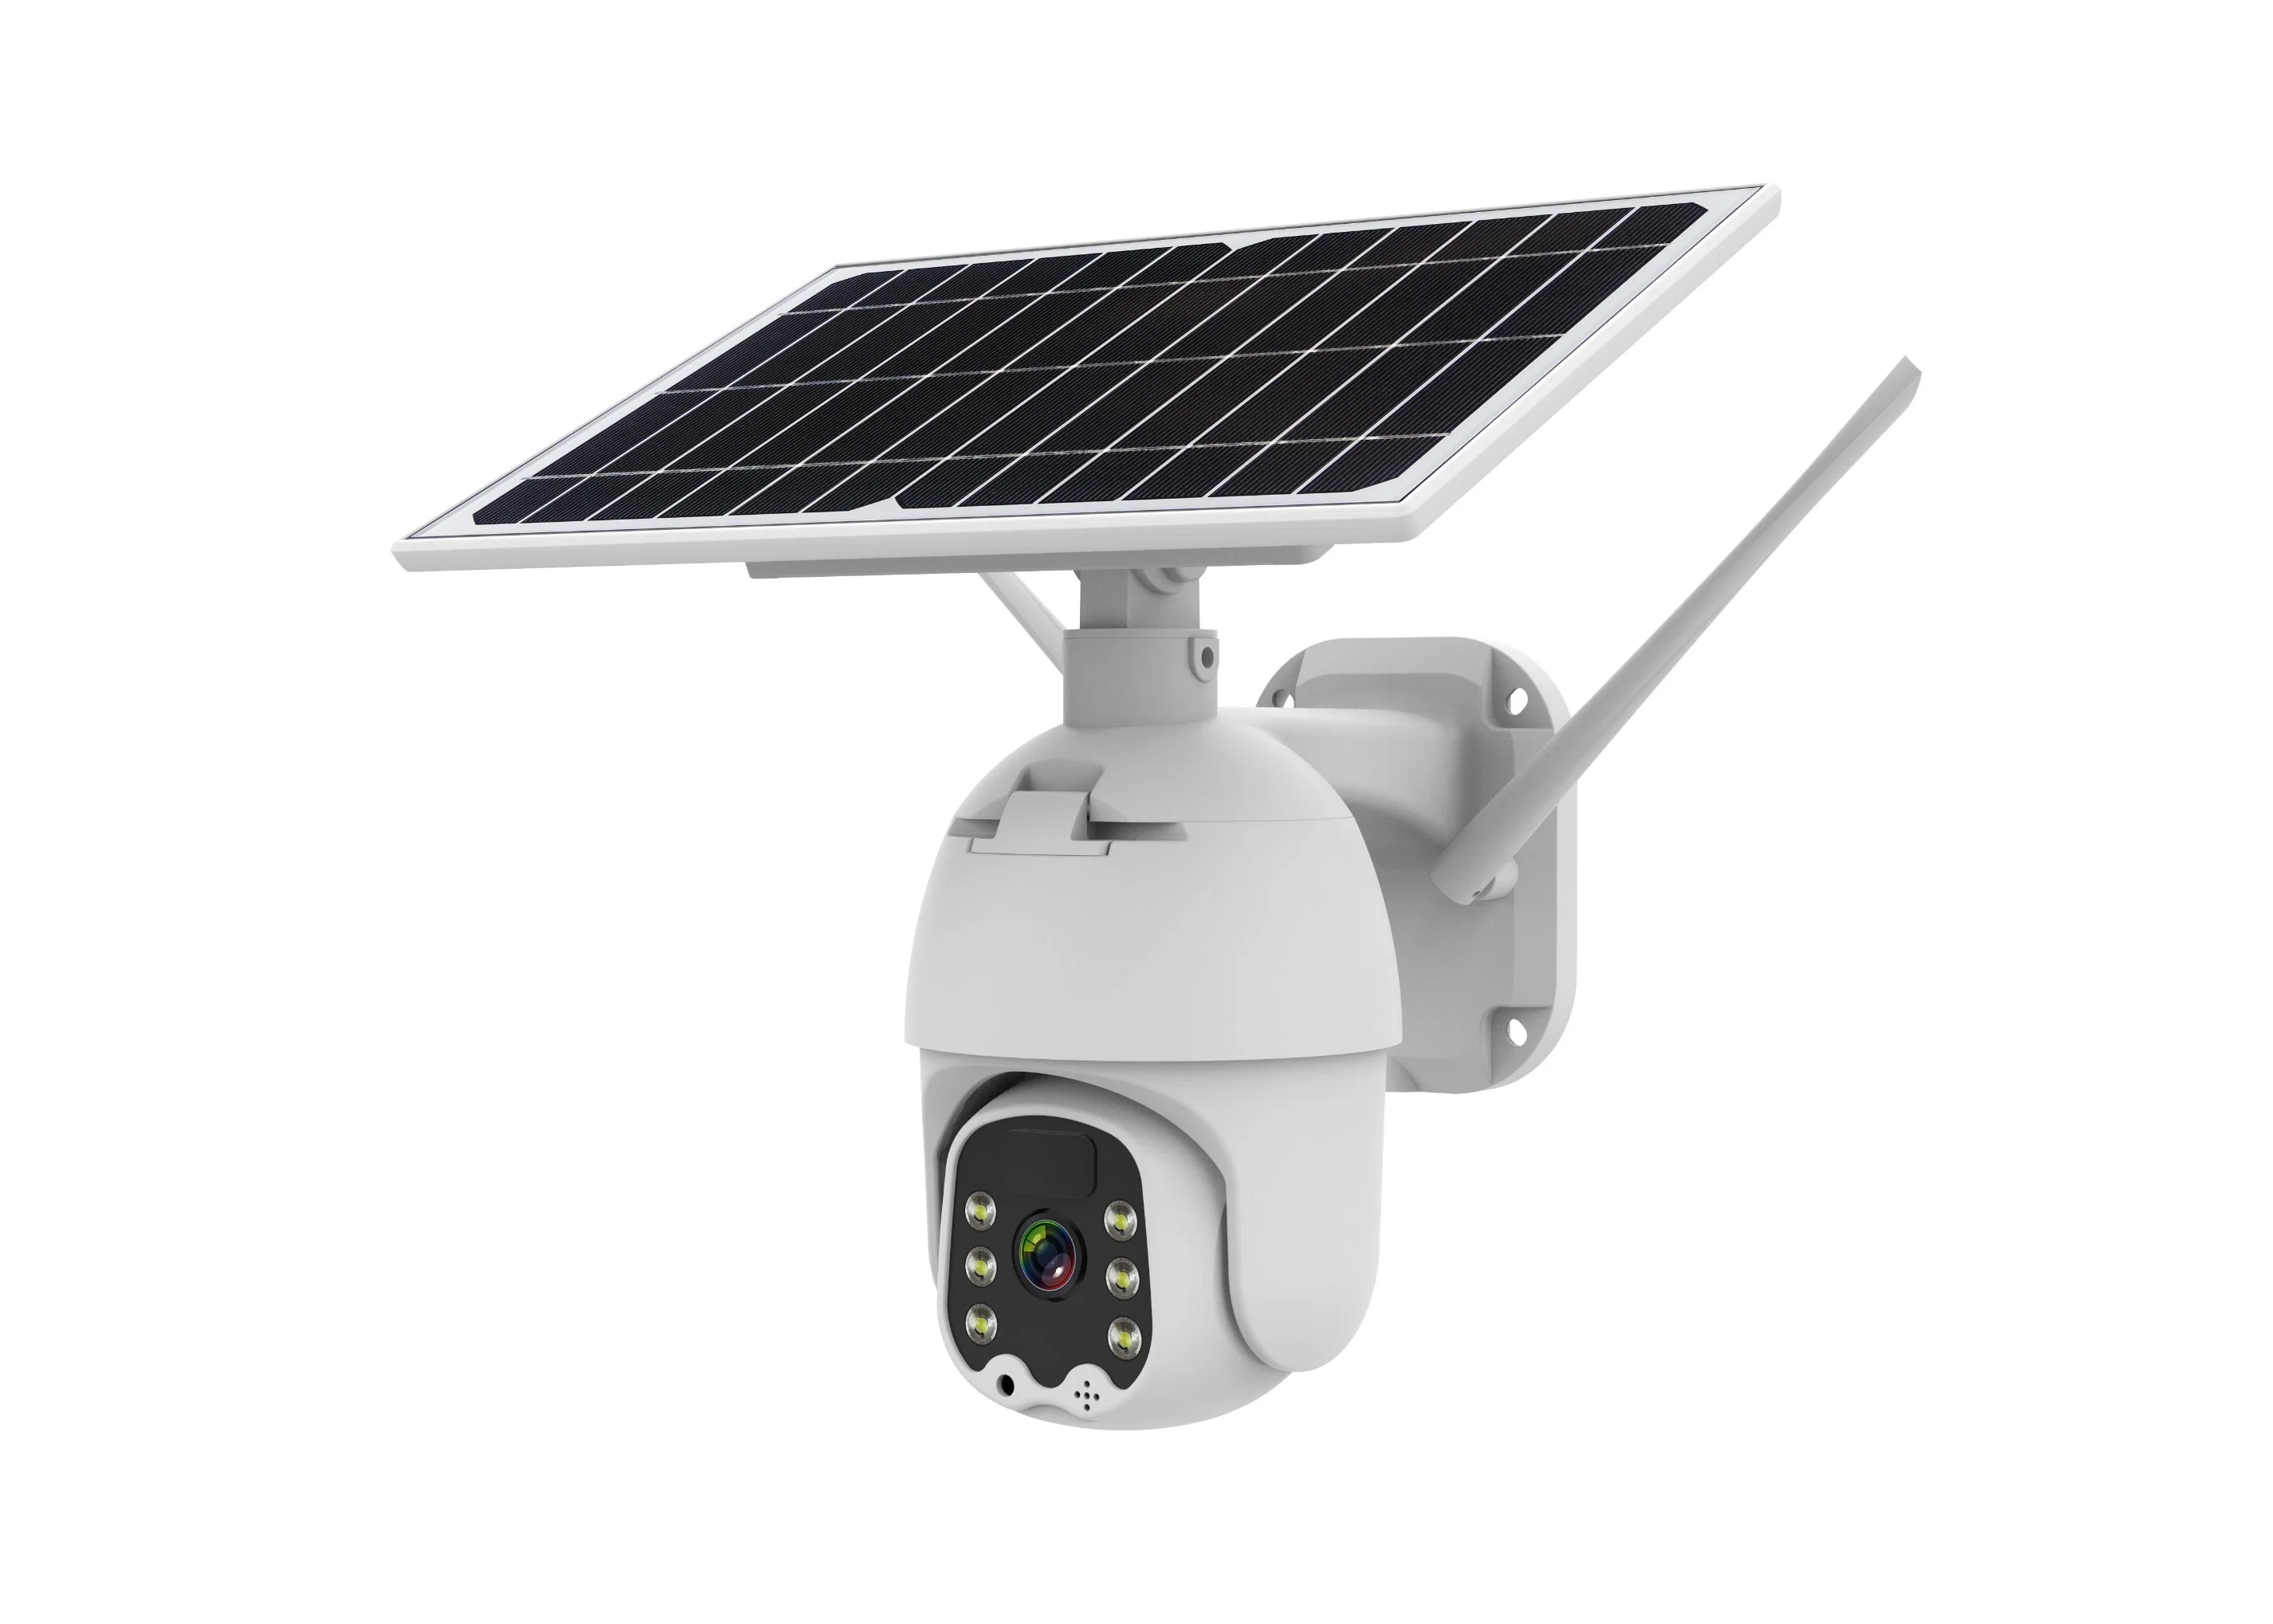 Hot Sale Tuya Battery Powered Solar CCTV Network Camera Alert PTZ IP Security or Outdoor or Home Icam+ APP